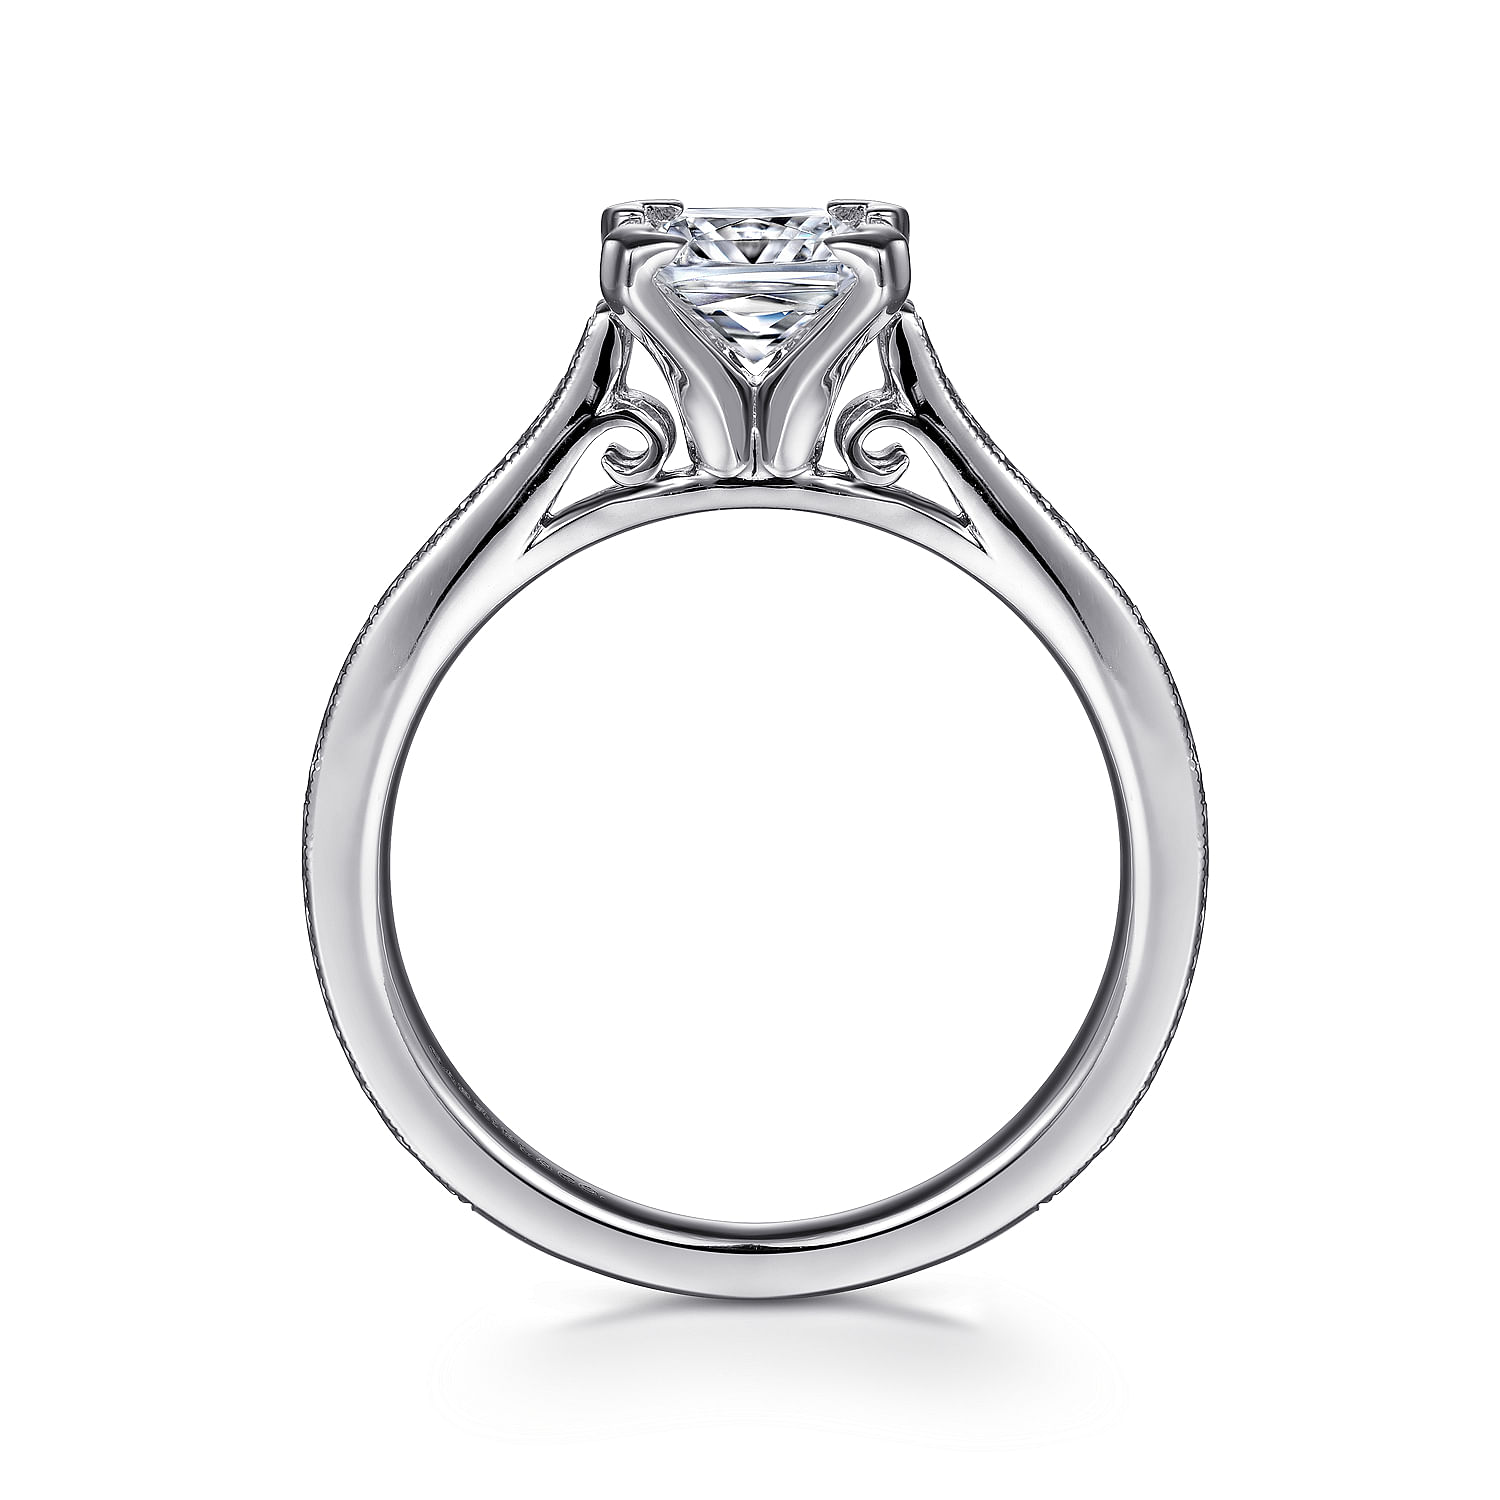 Vintage Inspired 14K White Gold Princess Cut Solitaire Engagement Ring